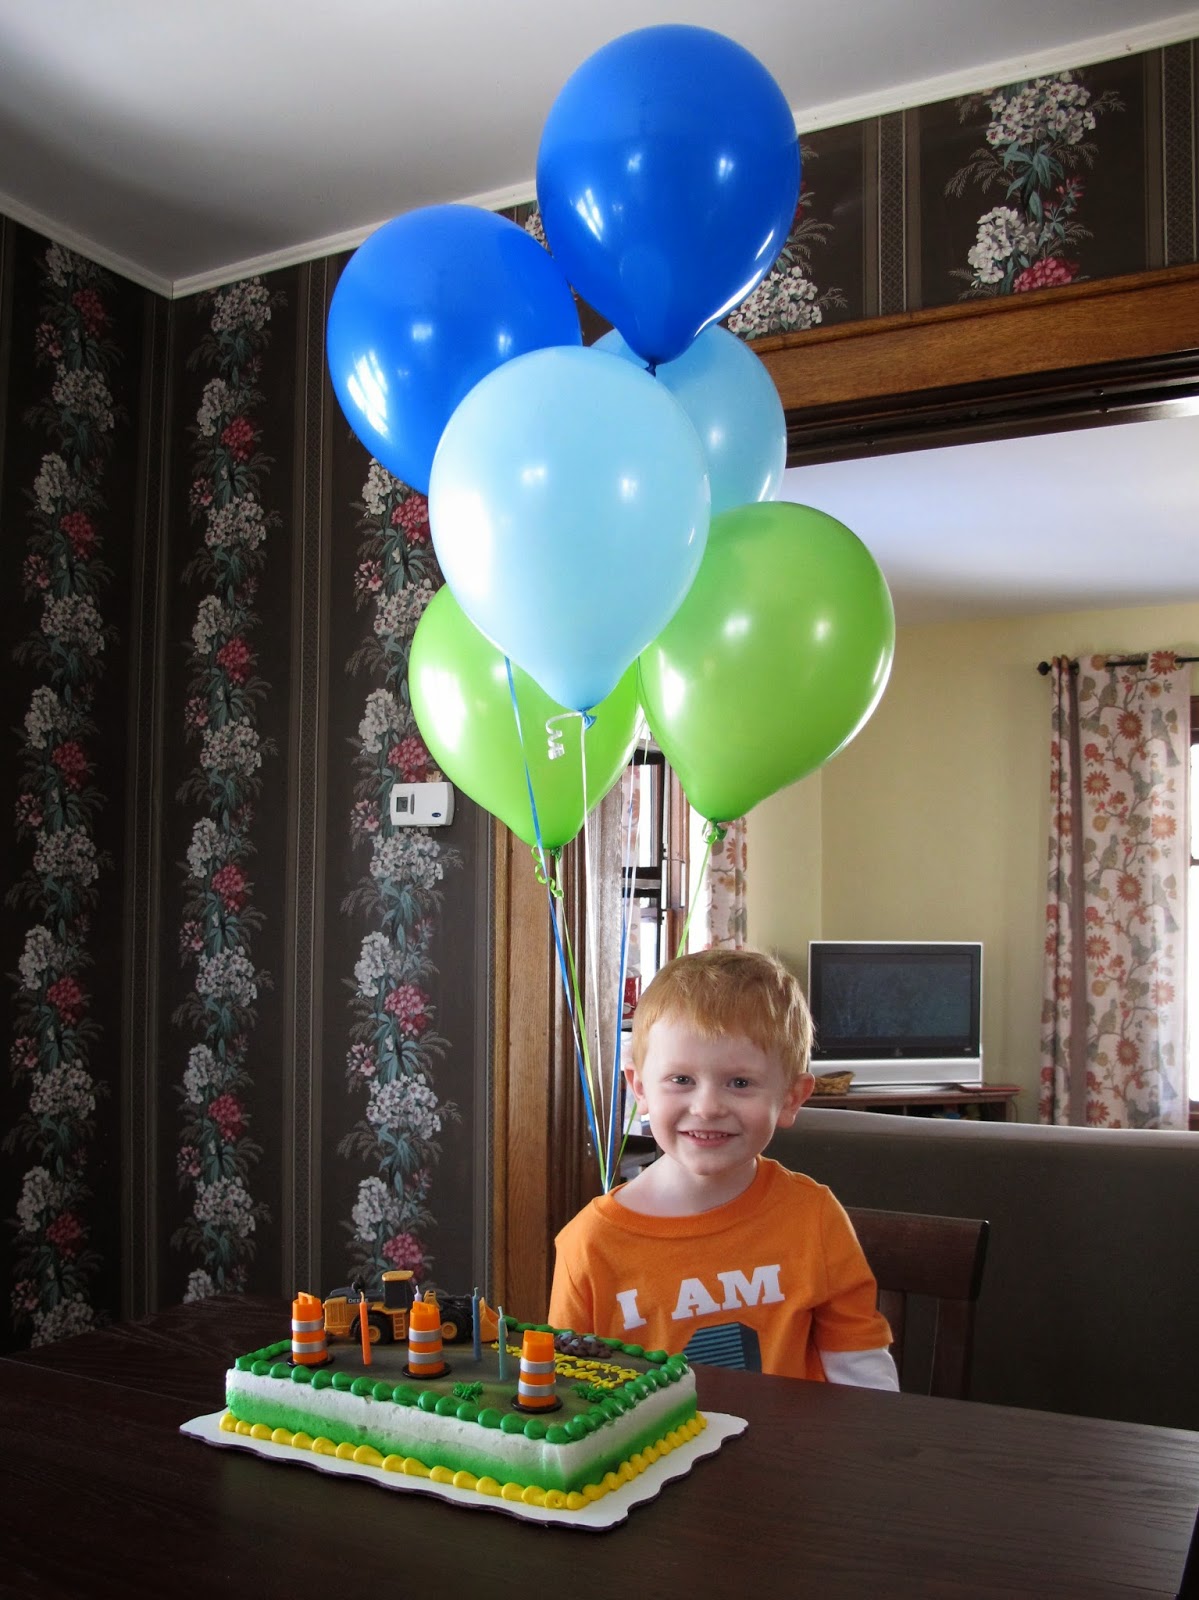 Porter with Balloons & Cake